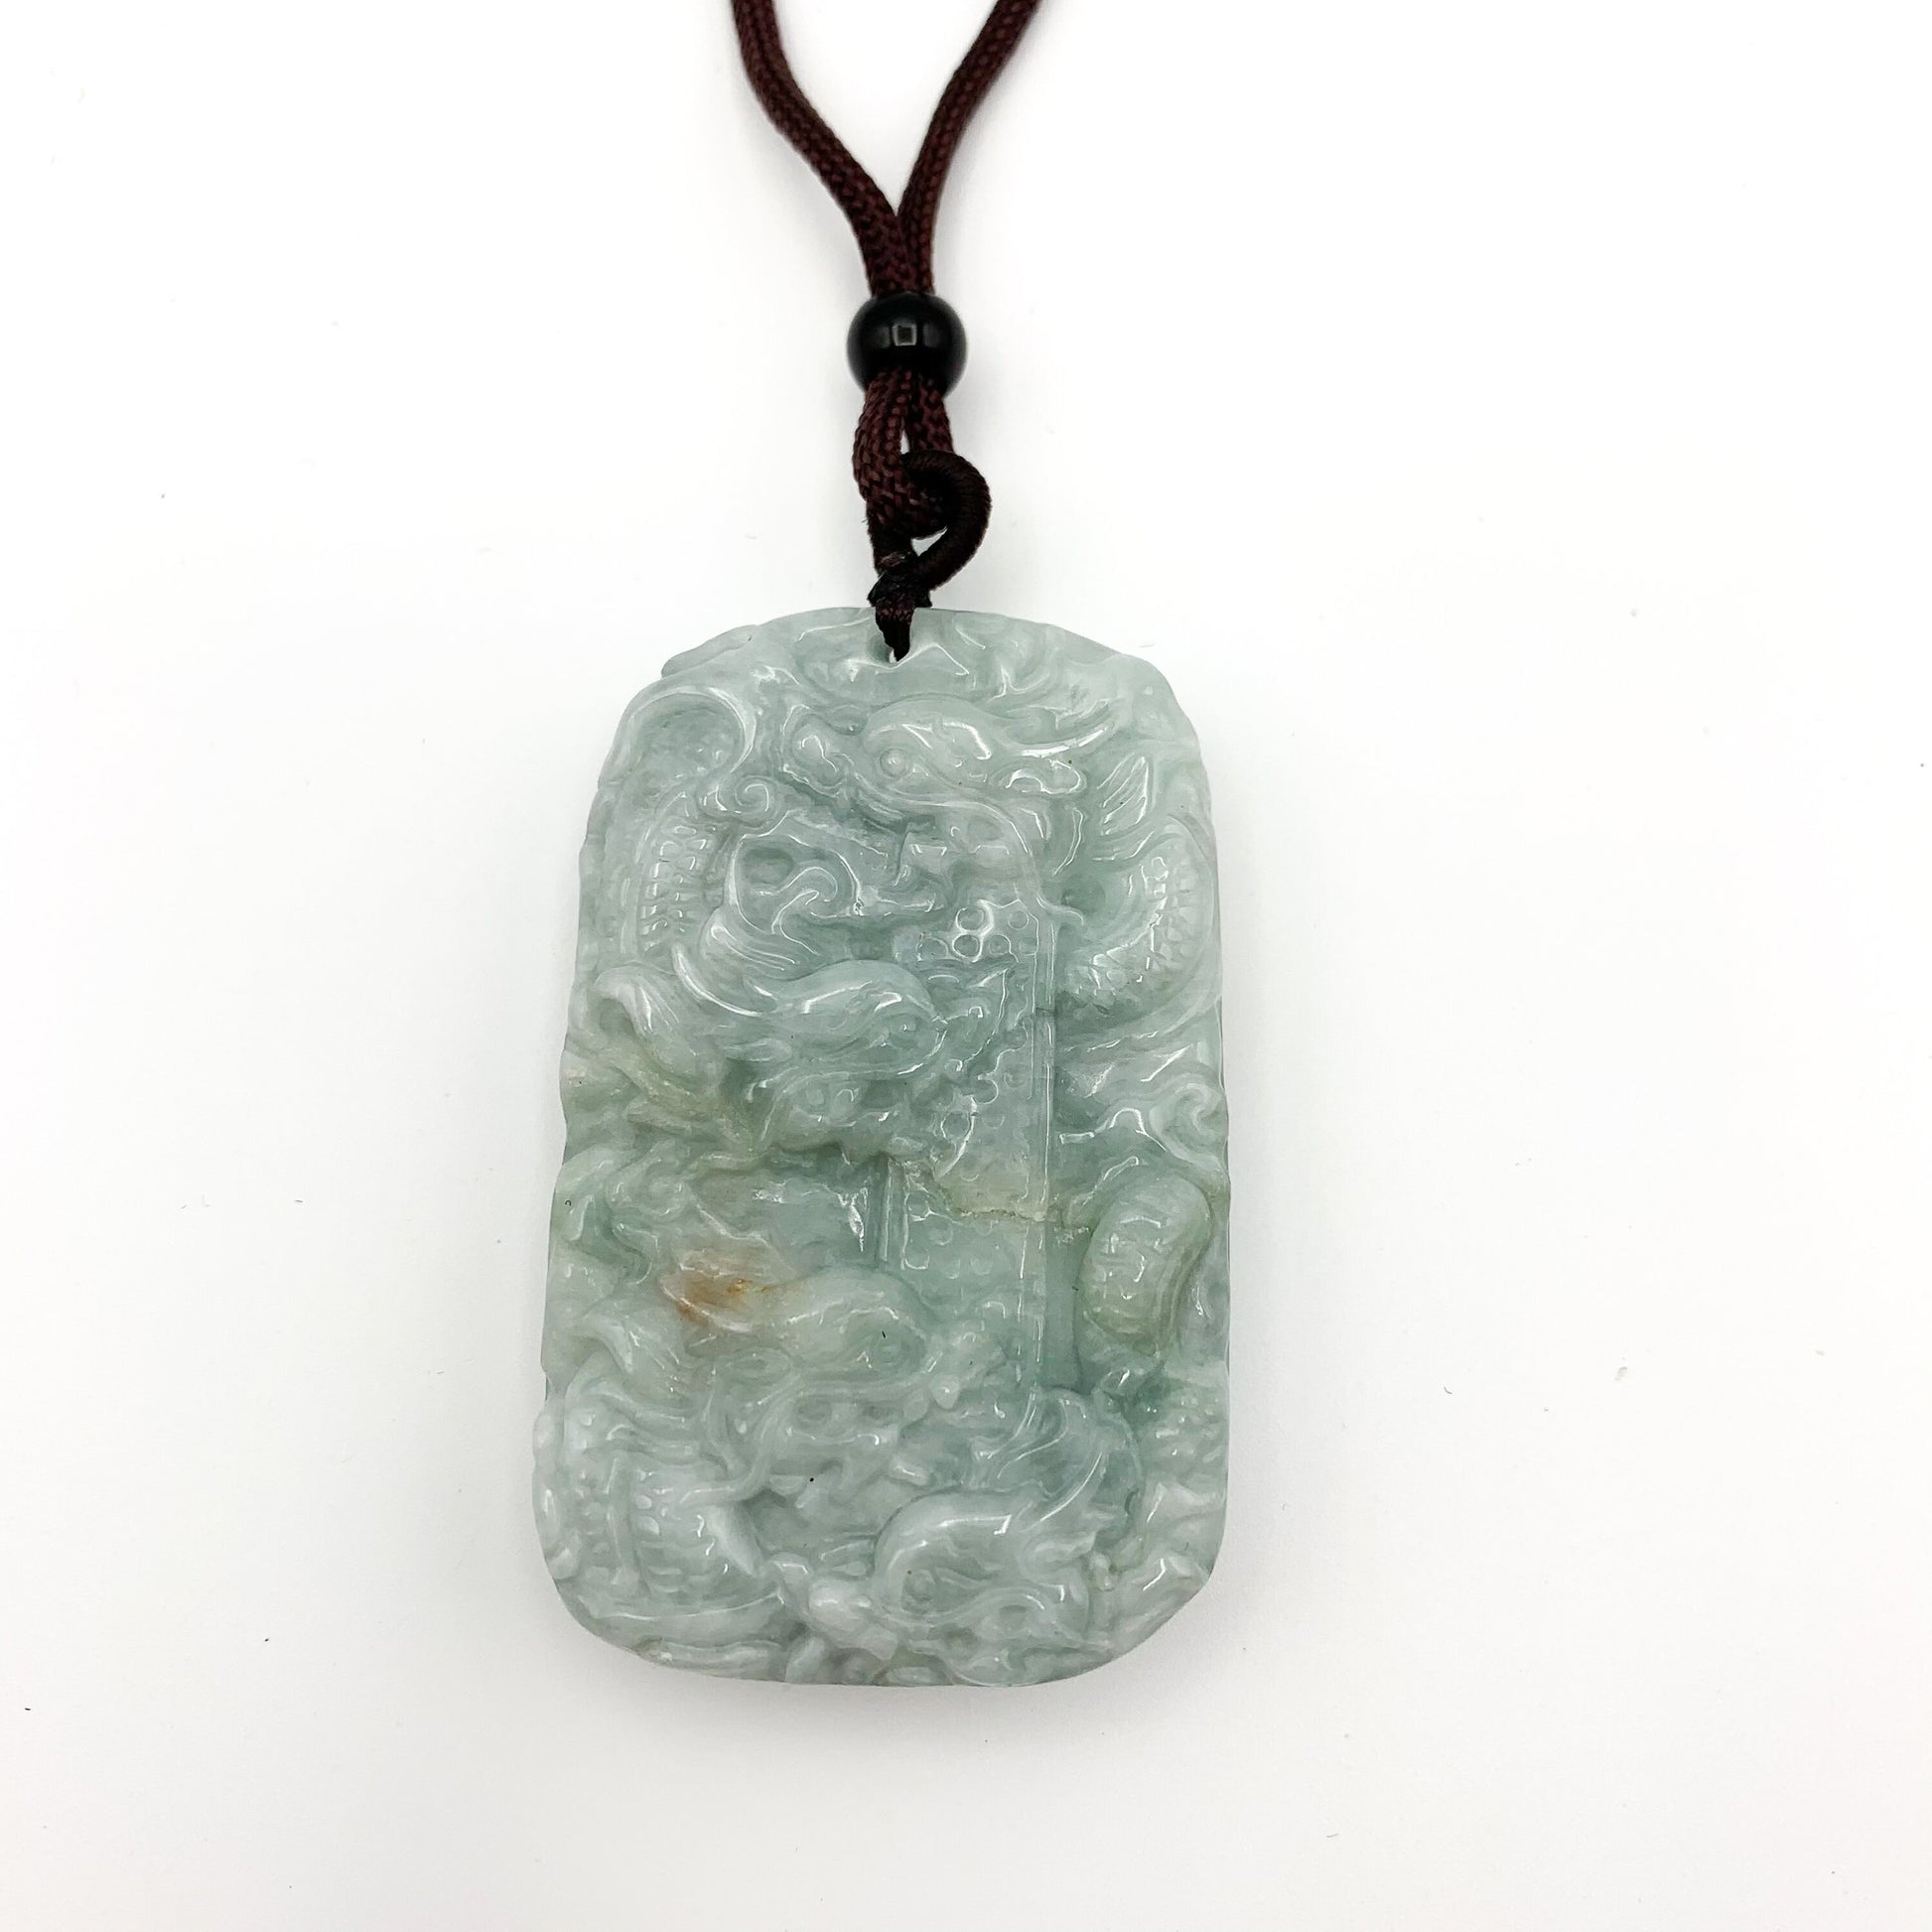 9 Dragon Jadeite Jade Chinese Zodiac Hand Carved Pendant Necklace, YJ-0321-0343576 - AriaDesignCollection